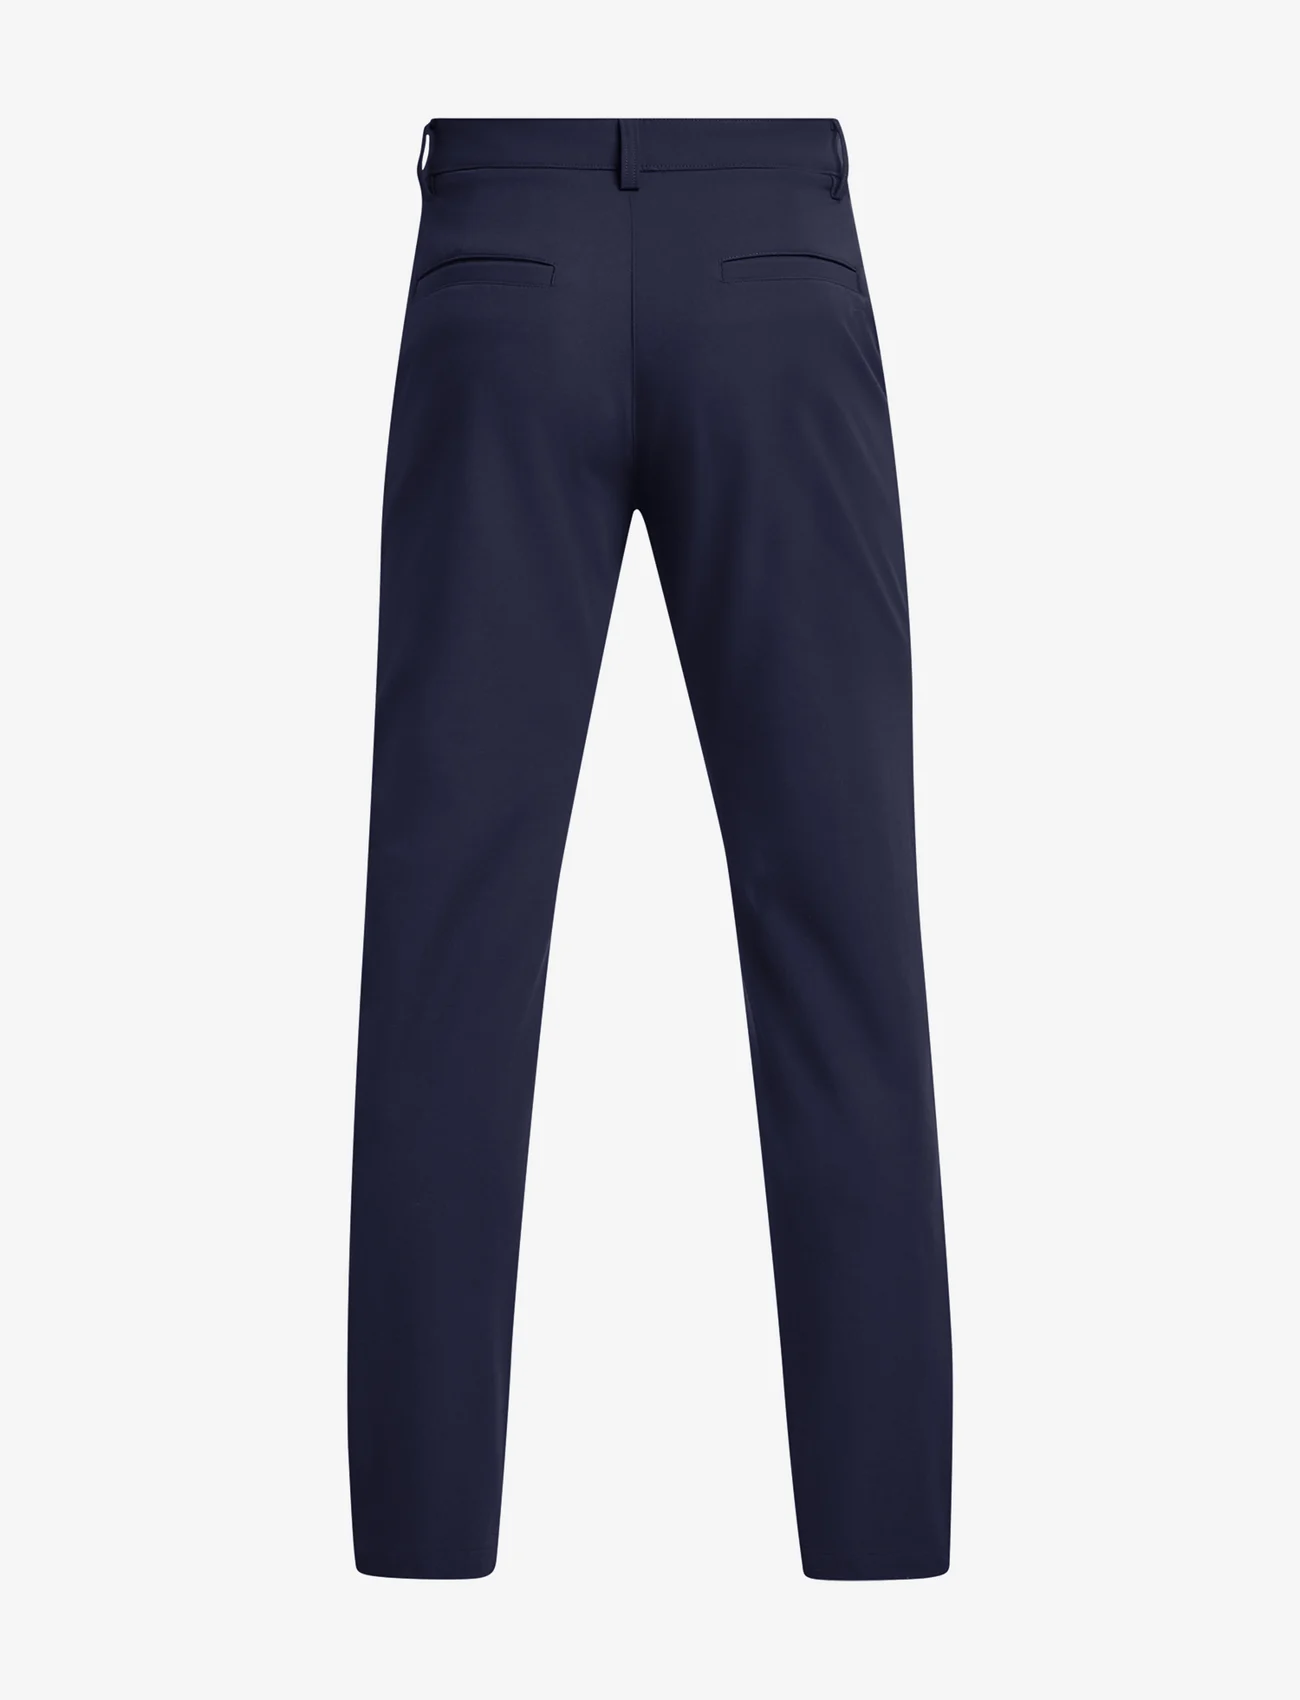 Under Armour - UA Tech Tapered Pant - golfhosen - midnight navy - 1